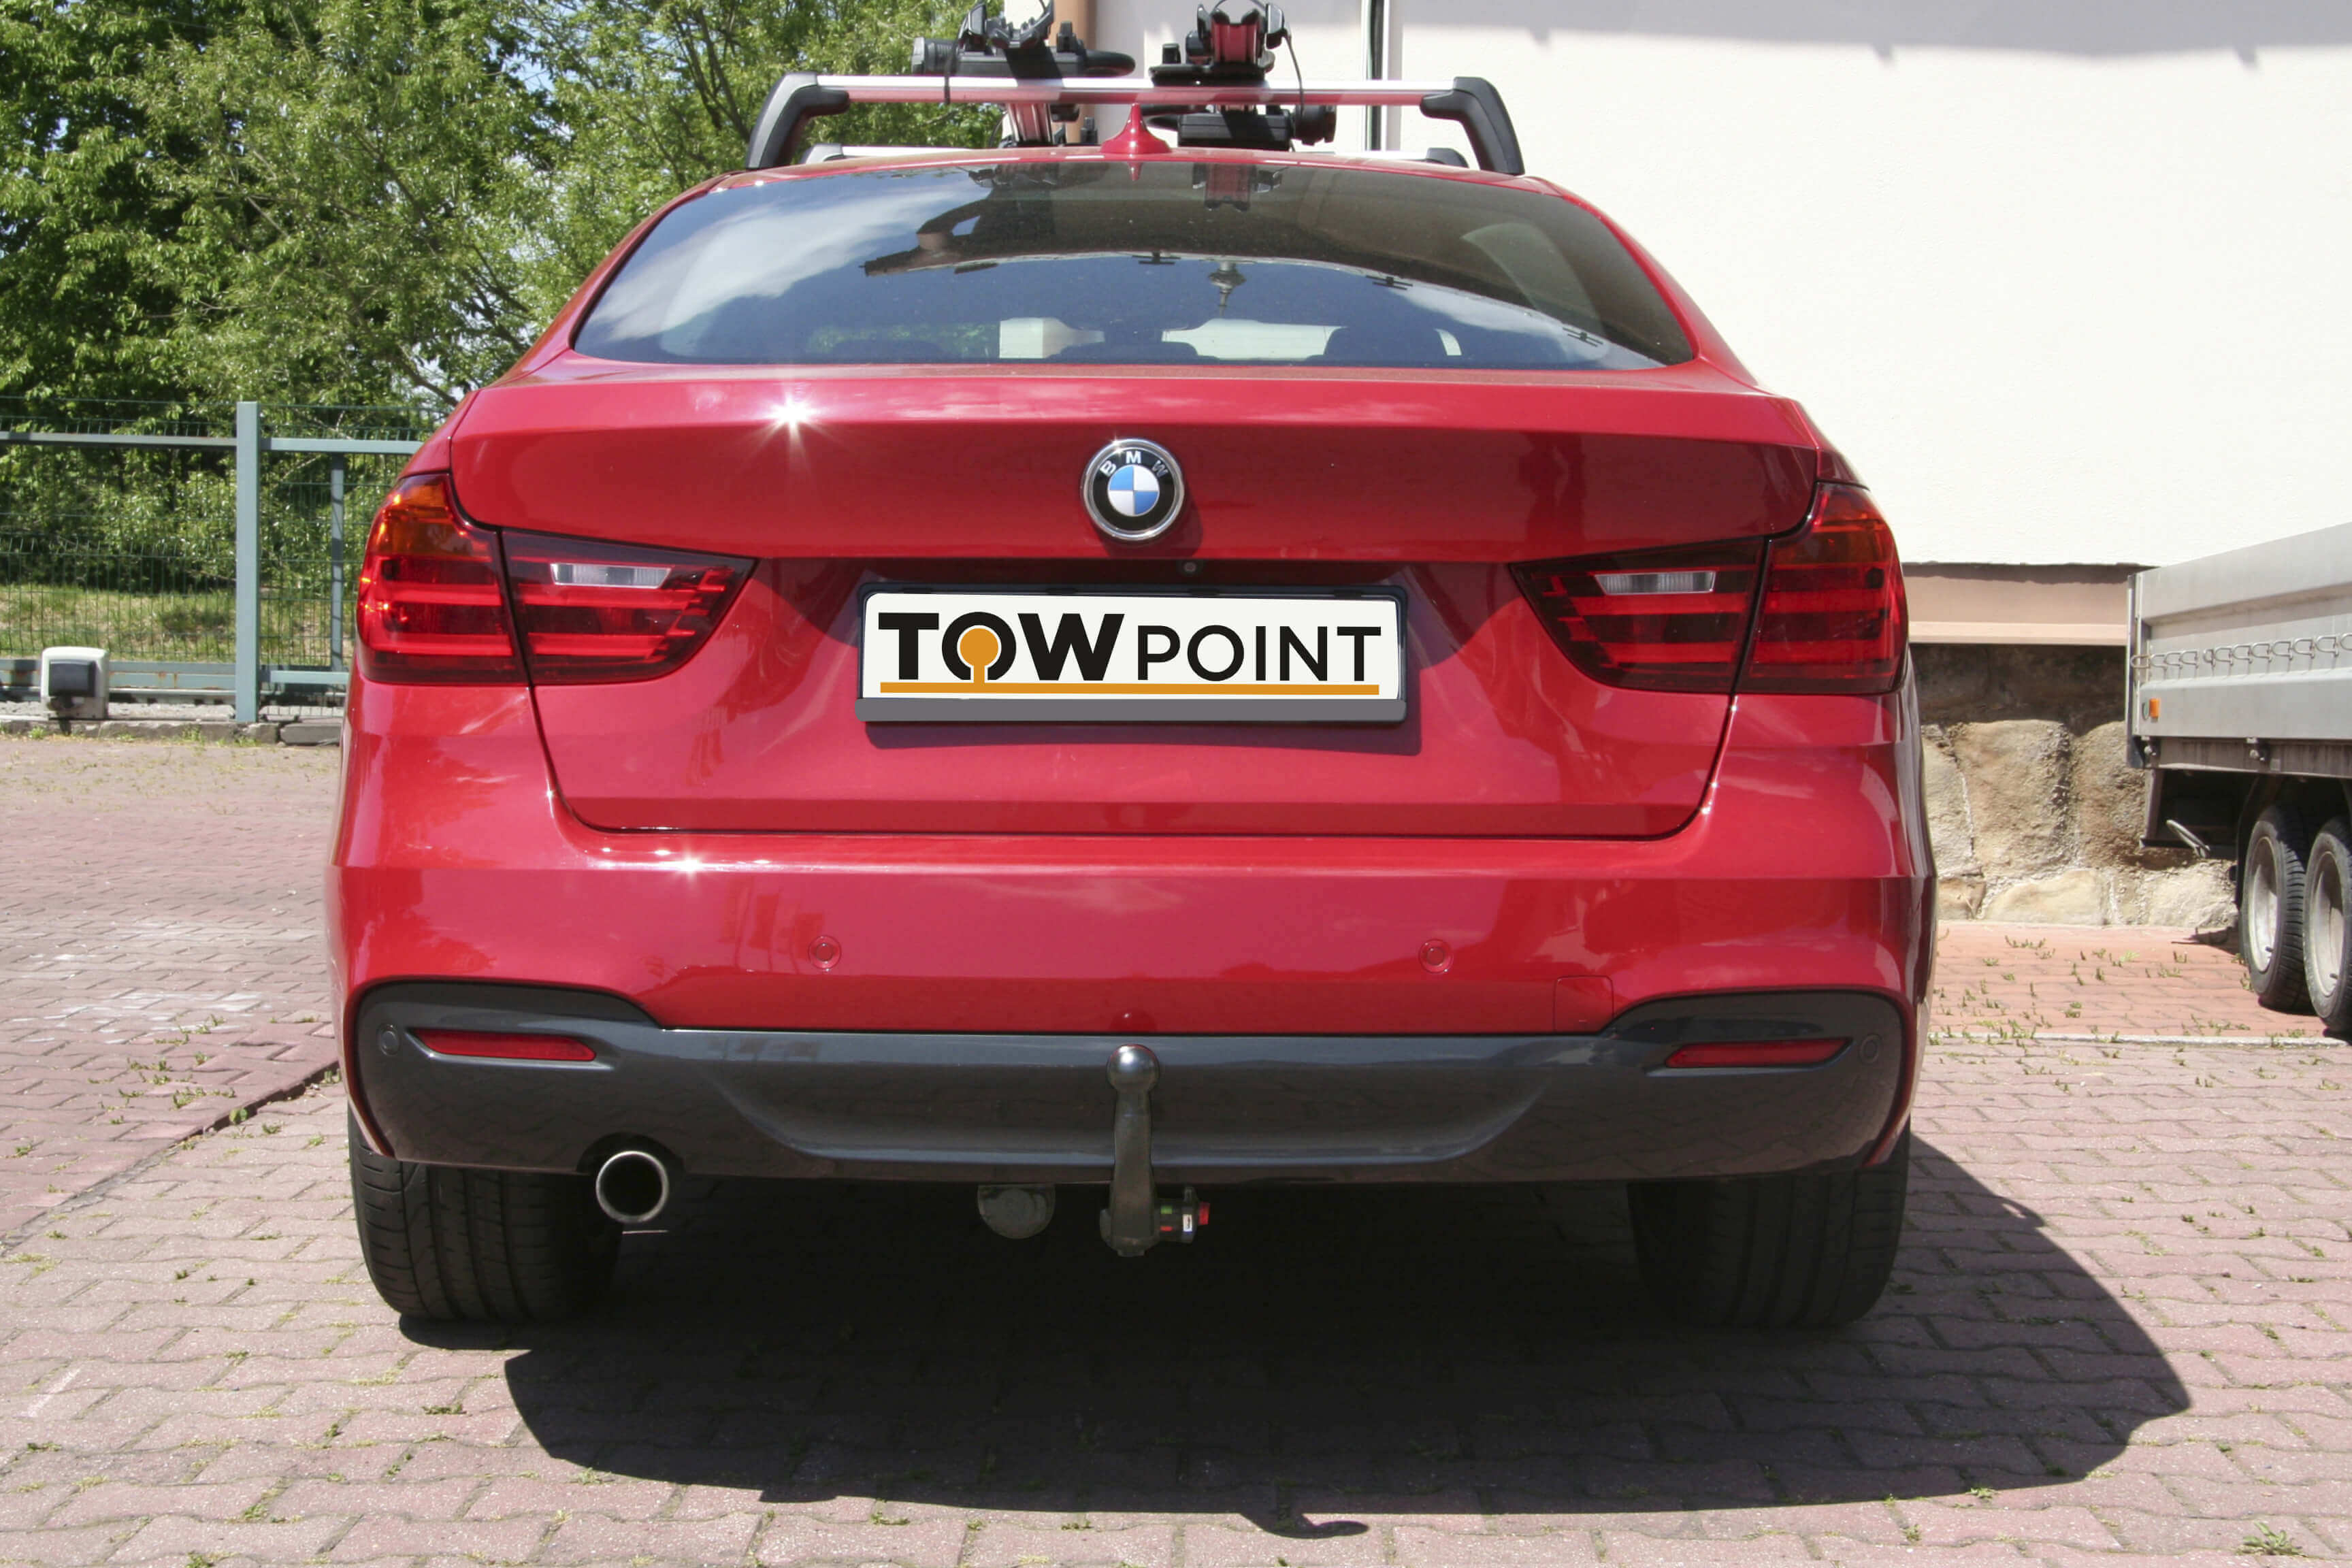 towpoint